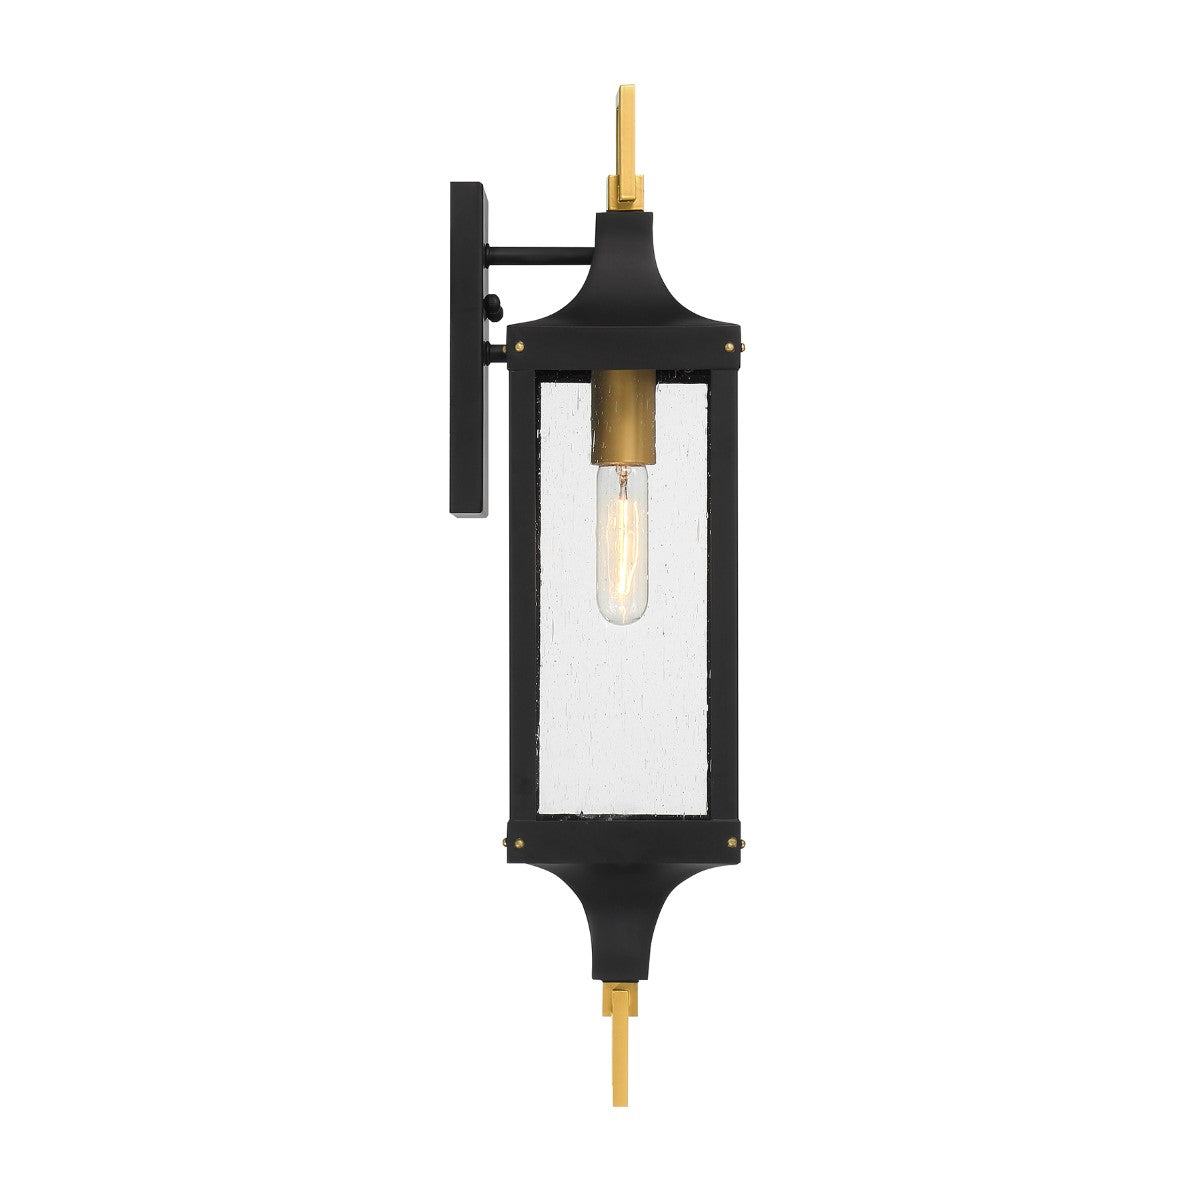 Glendale 25 in. Outdoor Wall Lantern Matte Black and Weathered Brushed Brass Finish